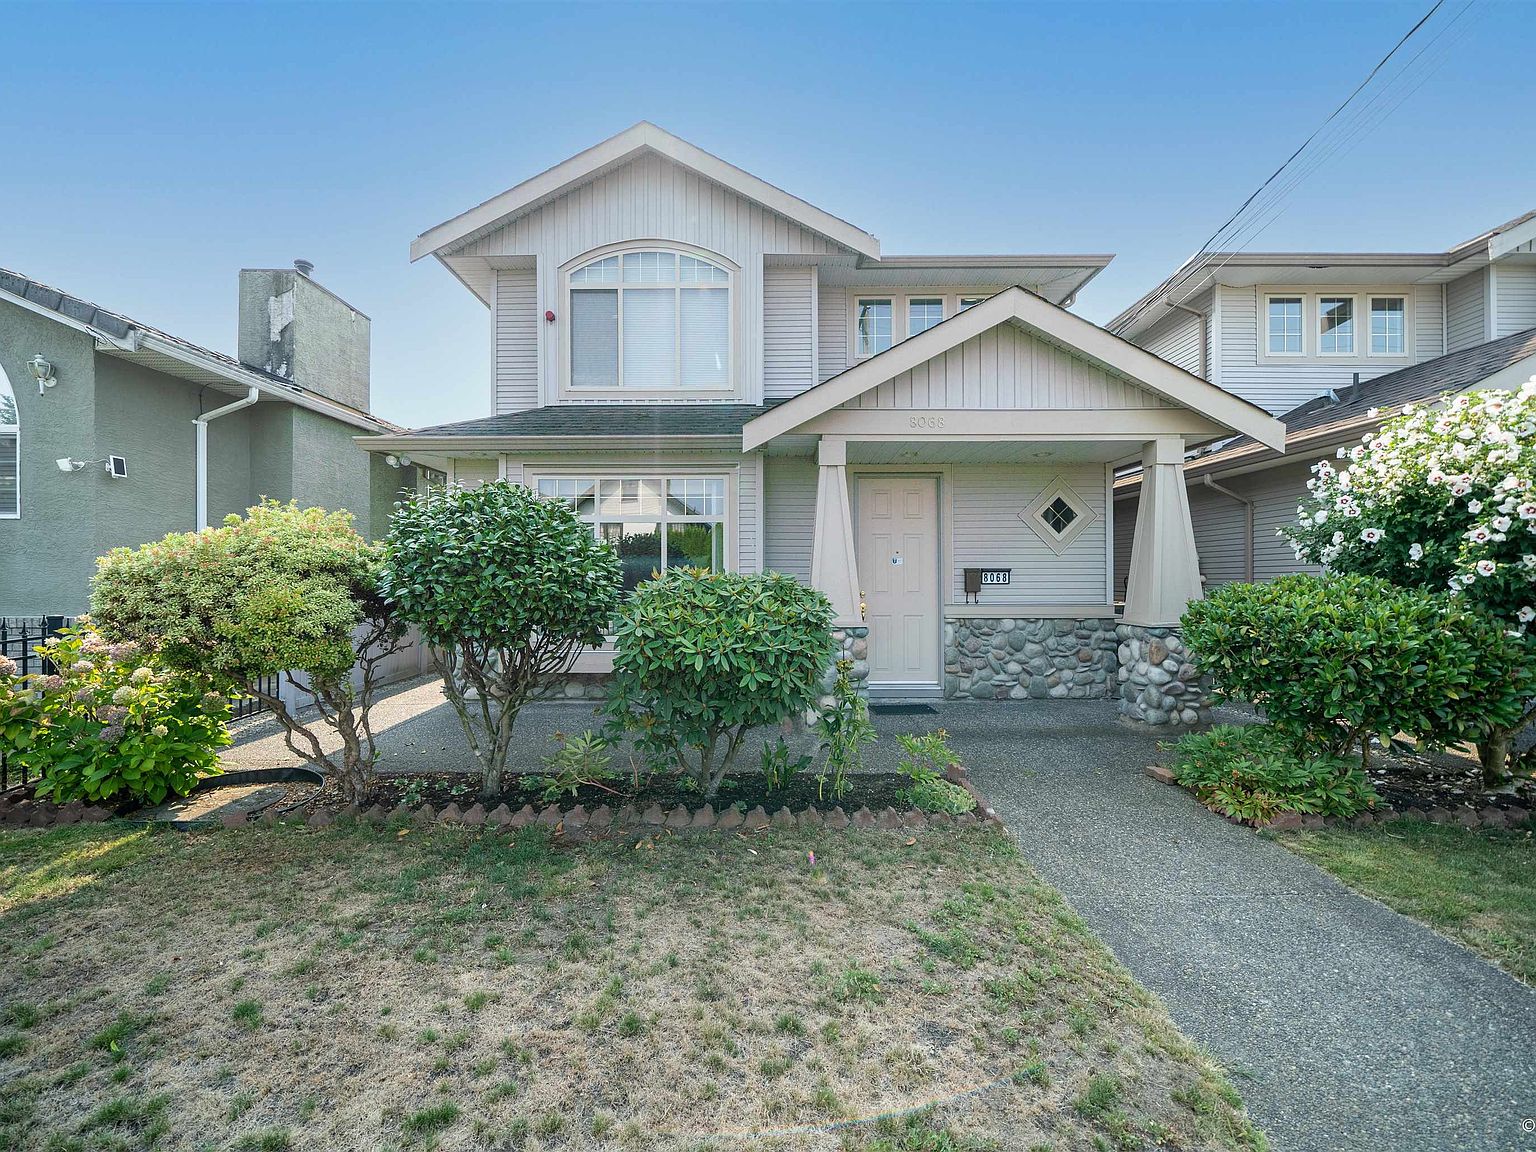 8068 16th Ave, Burnaby, BC V3N 1R5 | MLS #R2810070 | Zillow